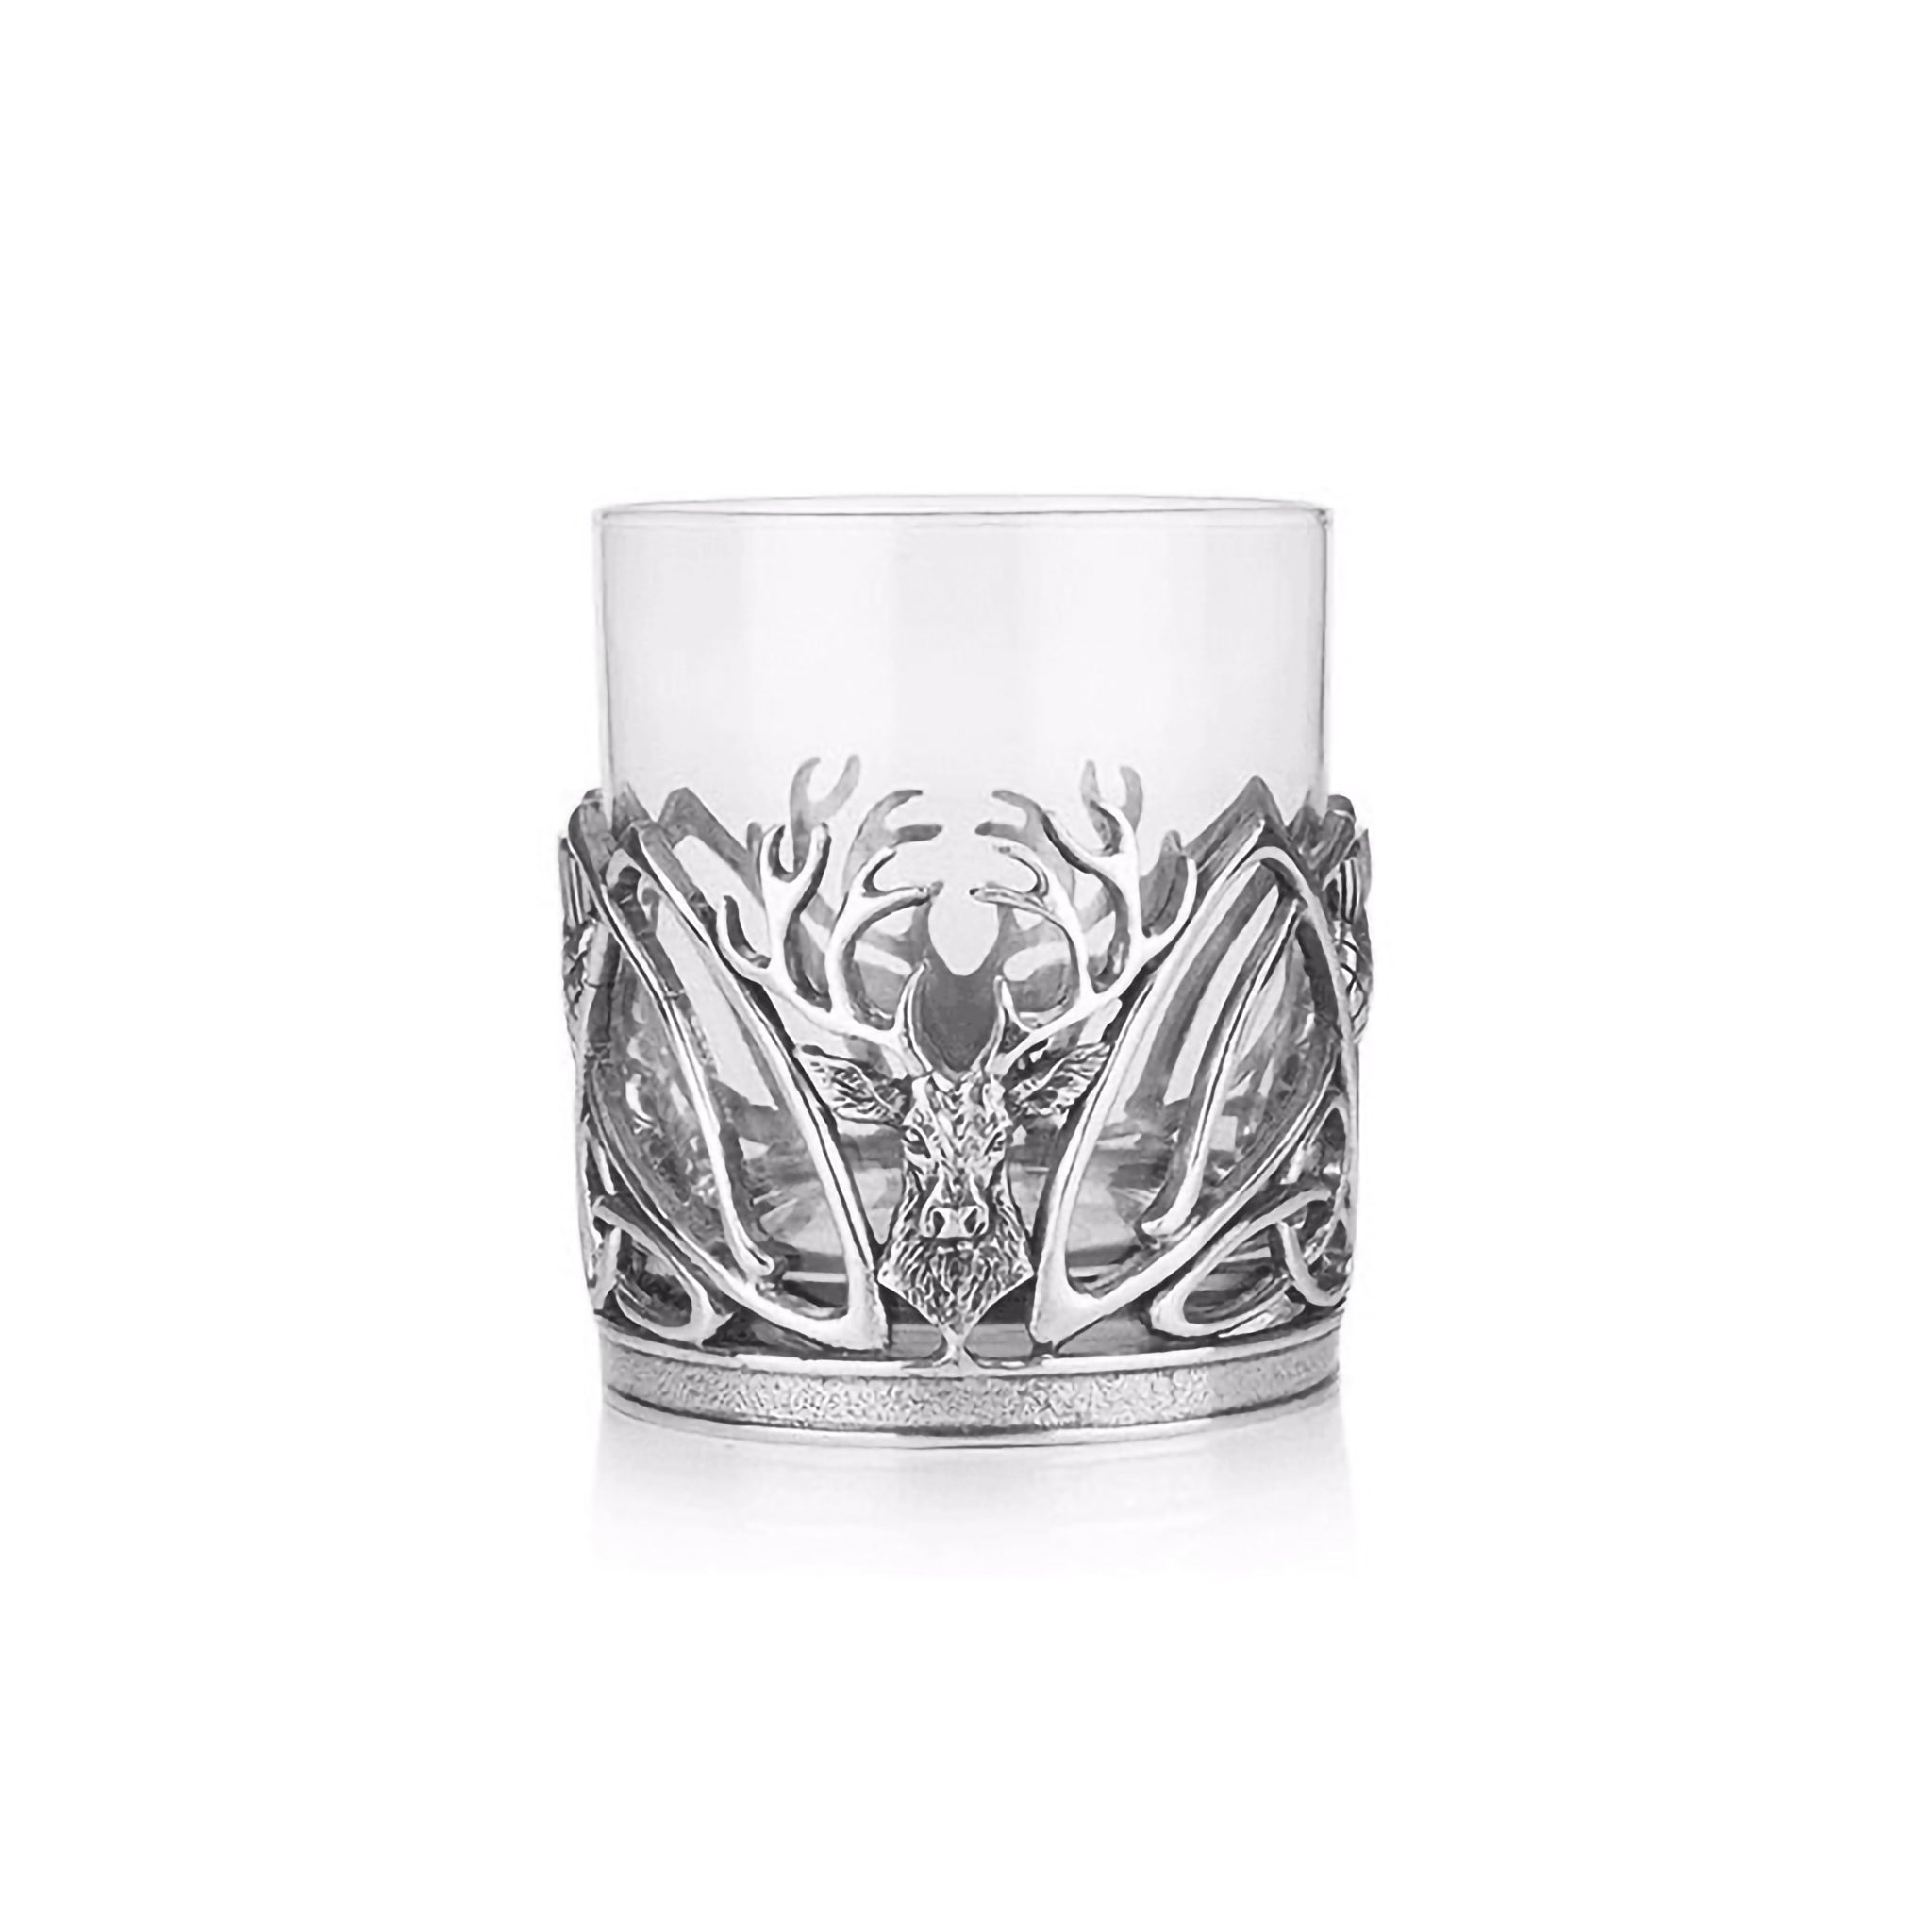 Glass whisky tumbler with a pewter base featuring stag heads with thistles and Celtic trinity knots